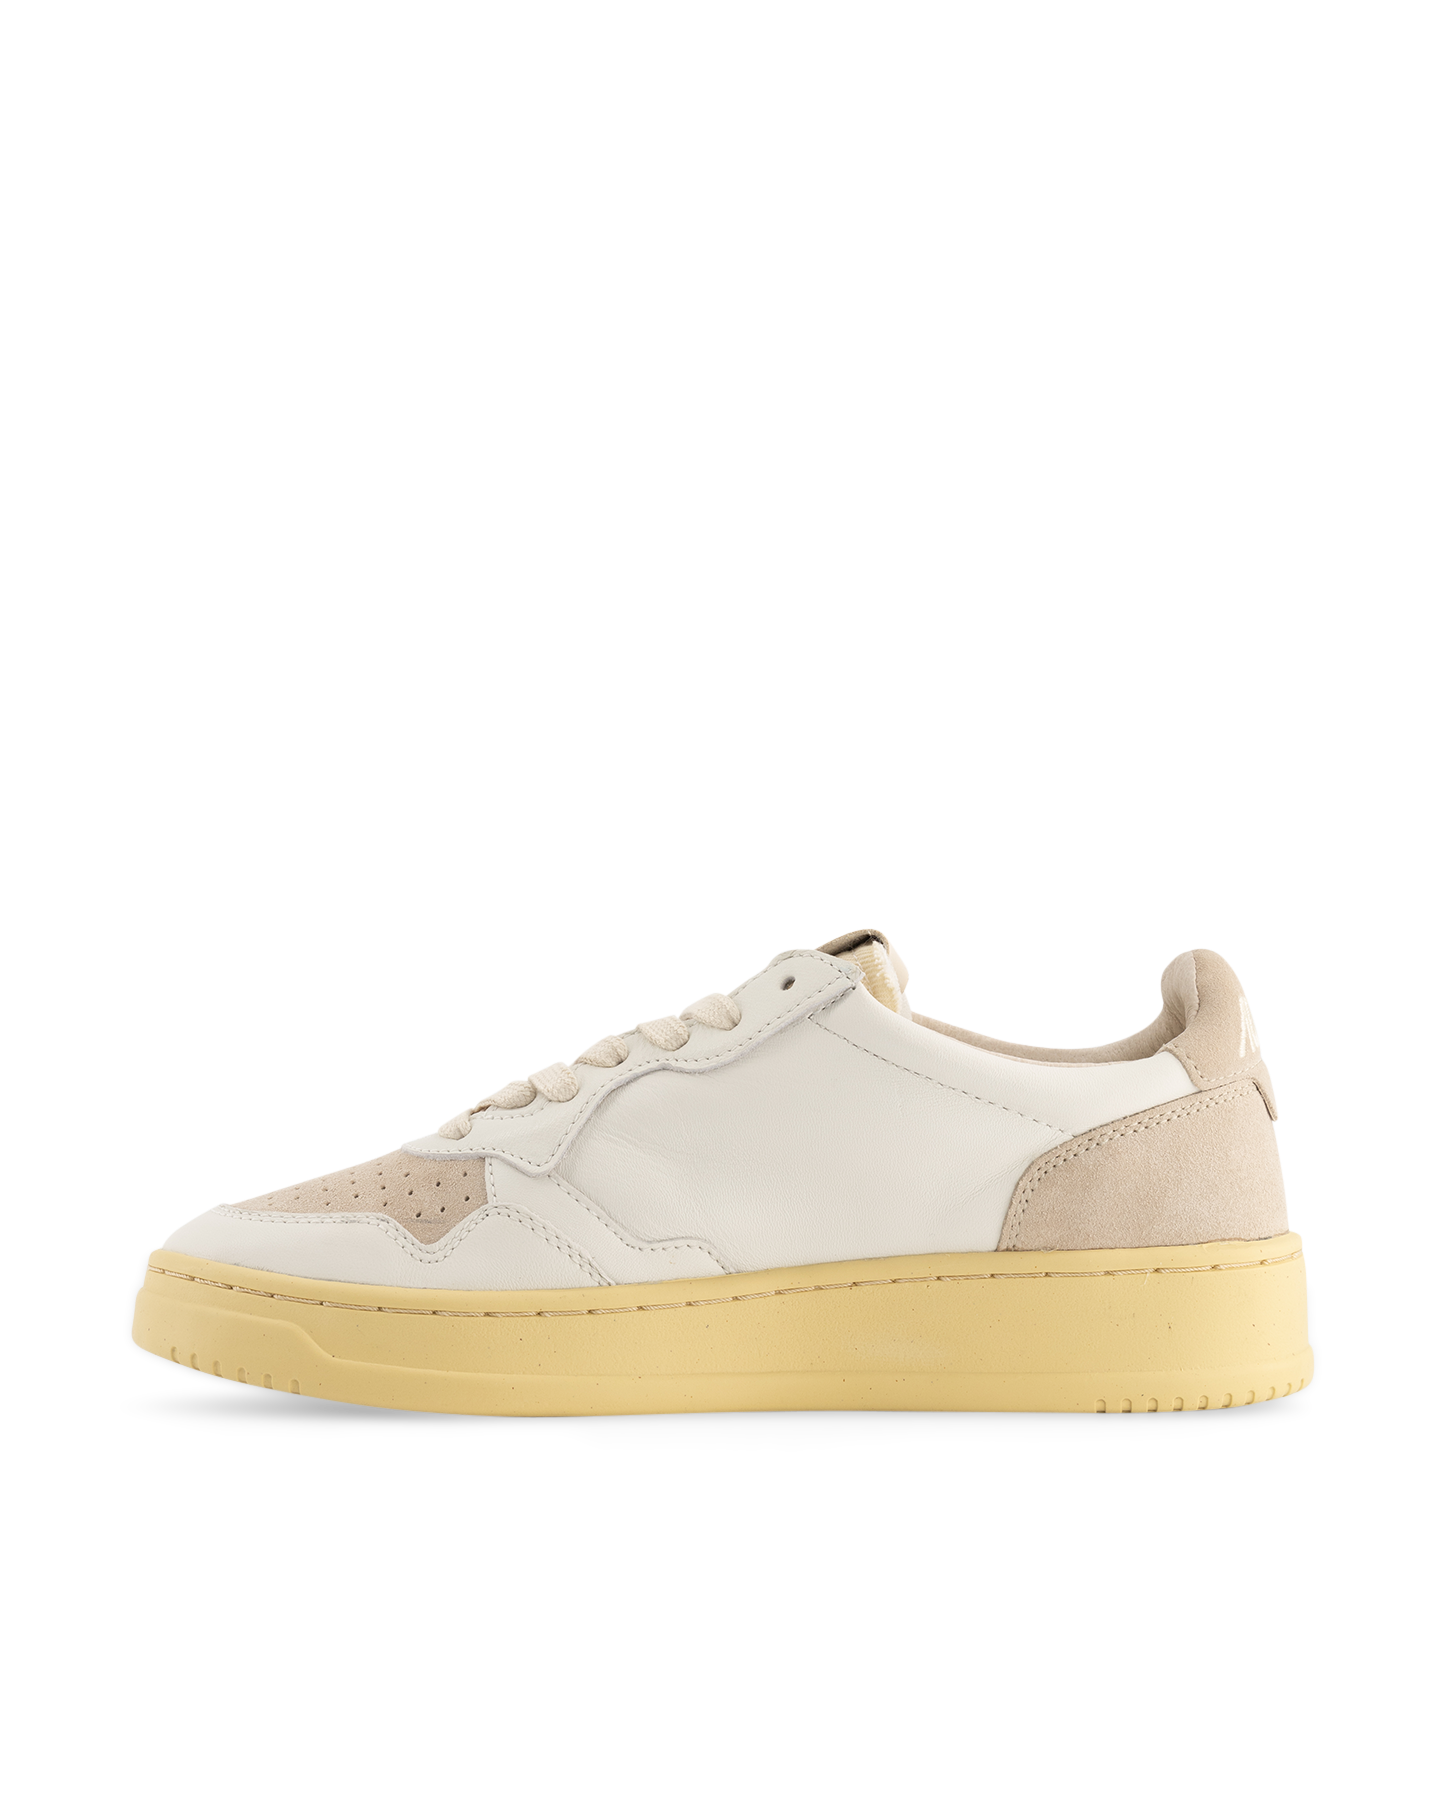 Autry Action Autry 01 Low Wom Suede/Leat Wht/Sand White 4